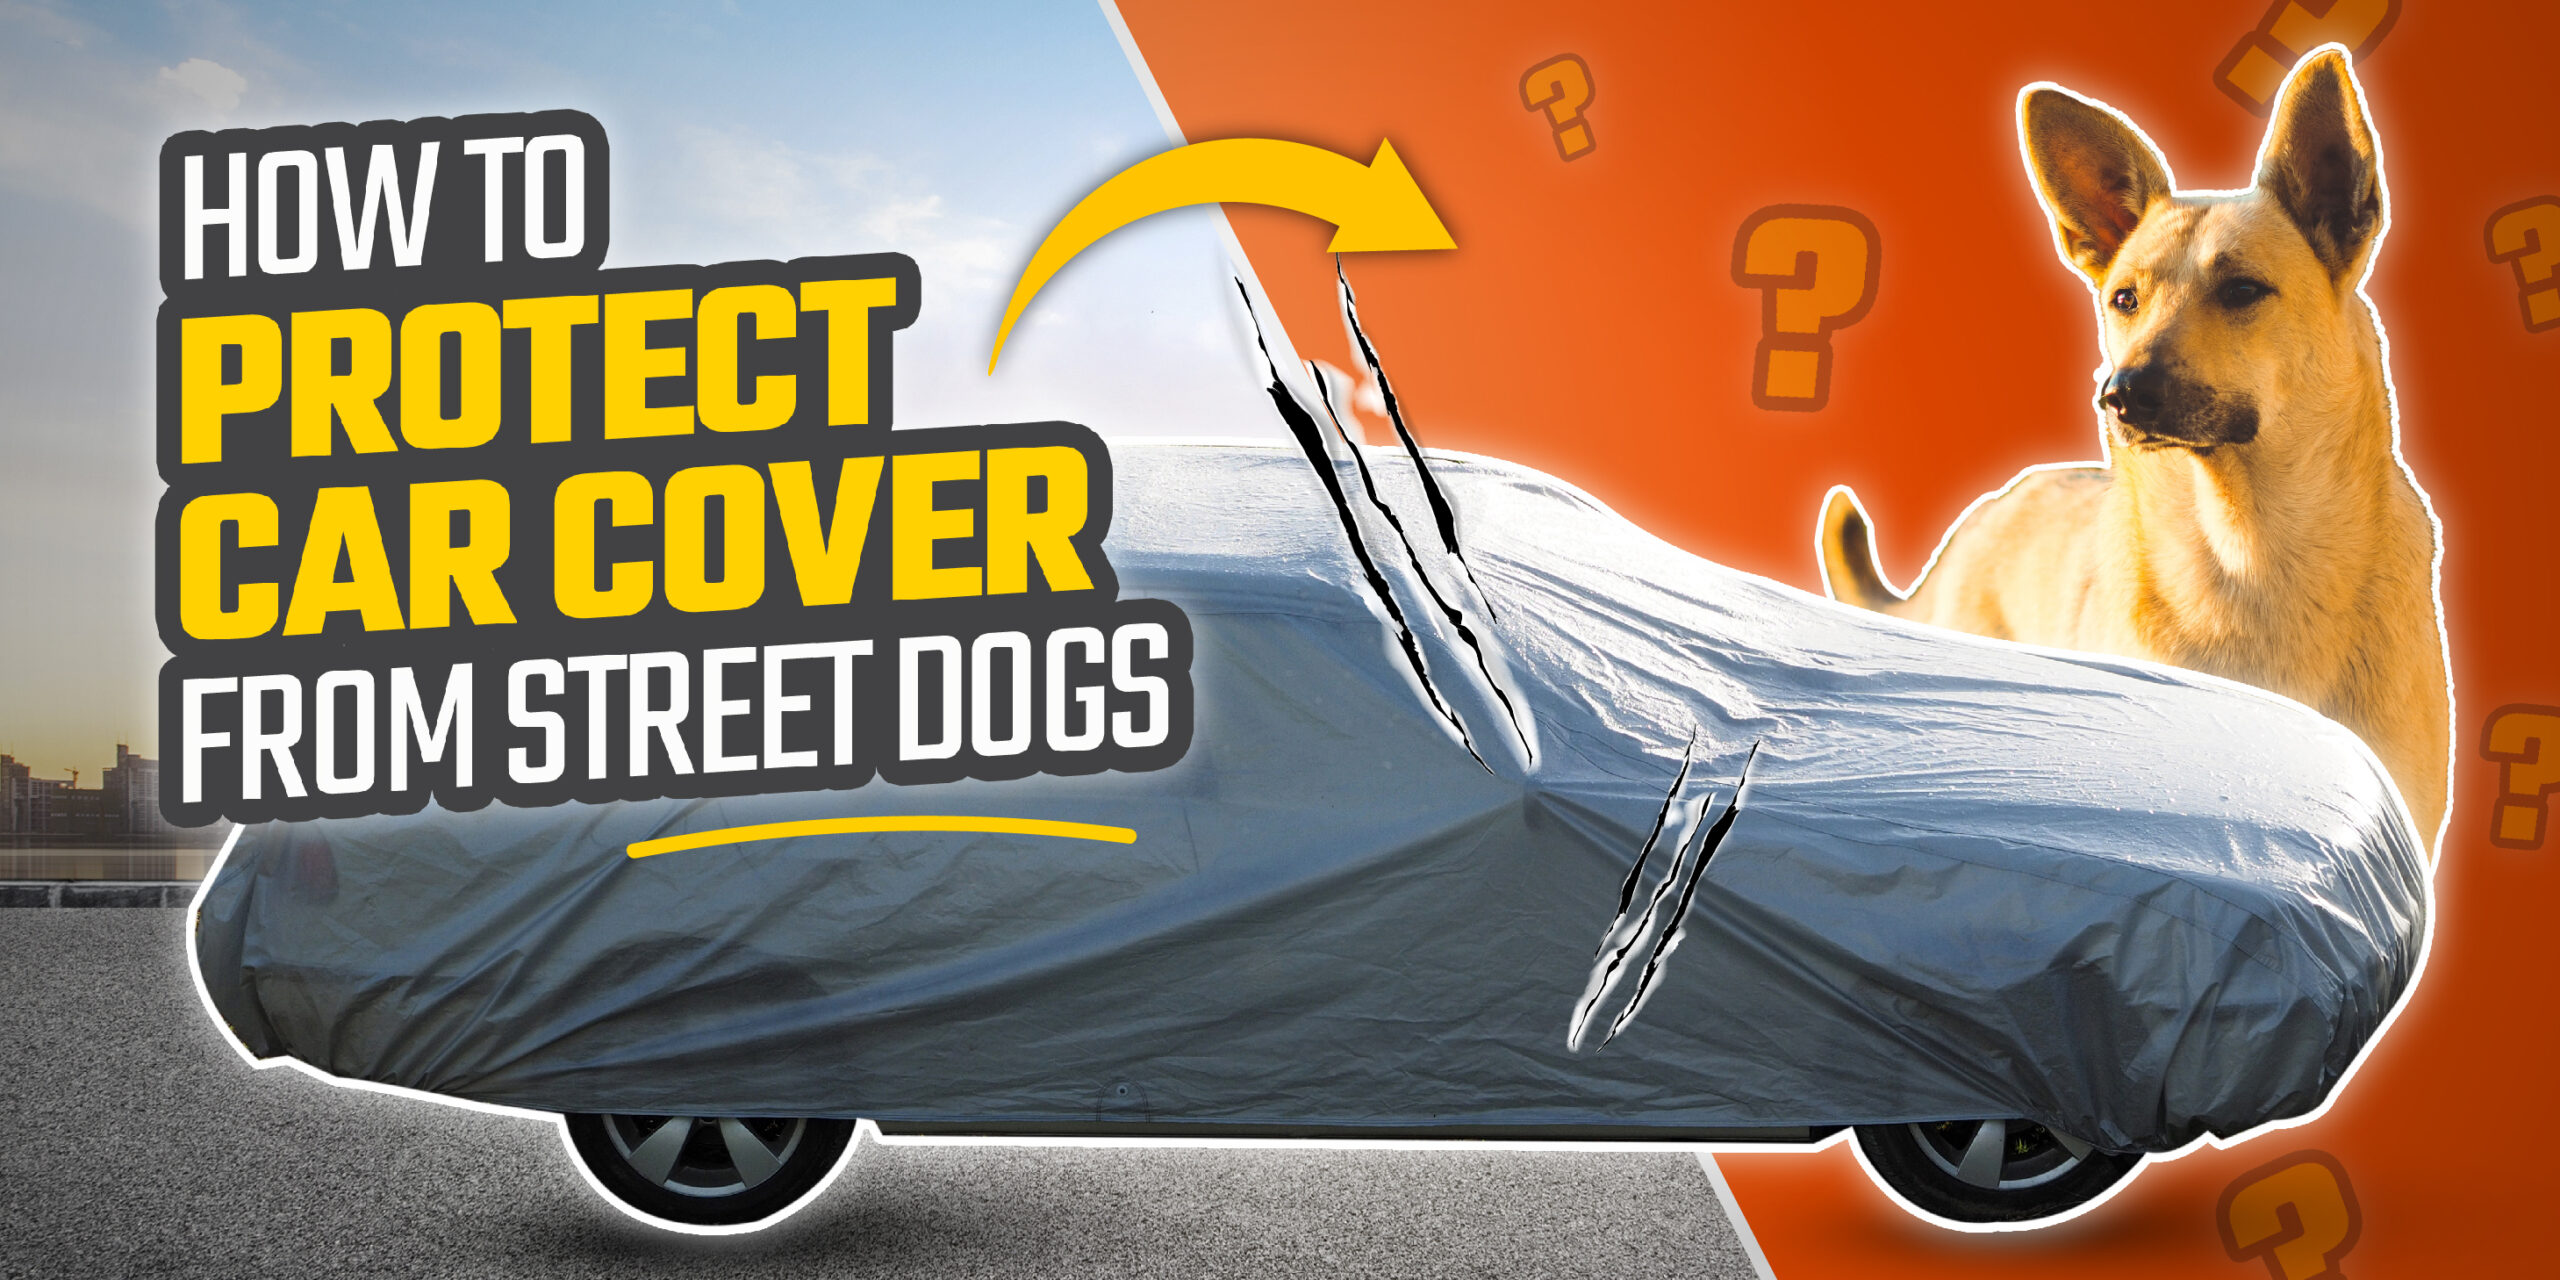 How to Protect Car Cover From Street Dogs